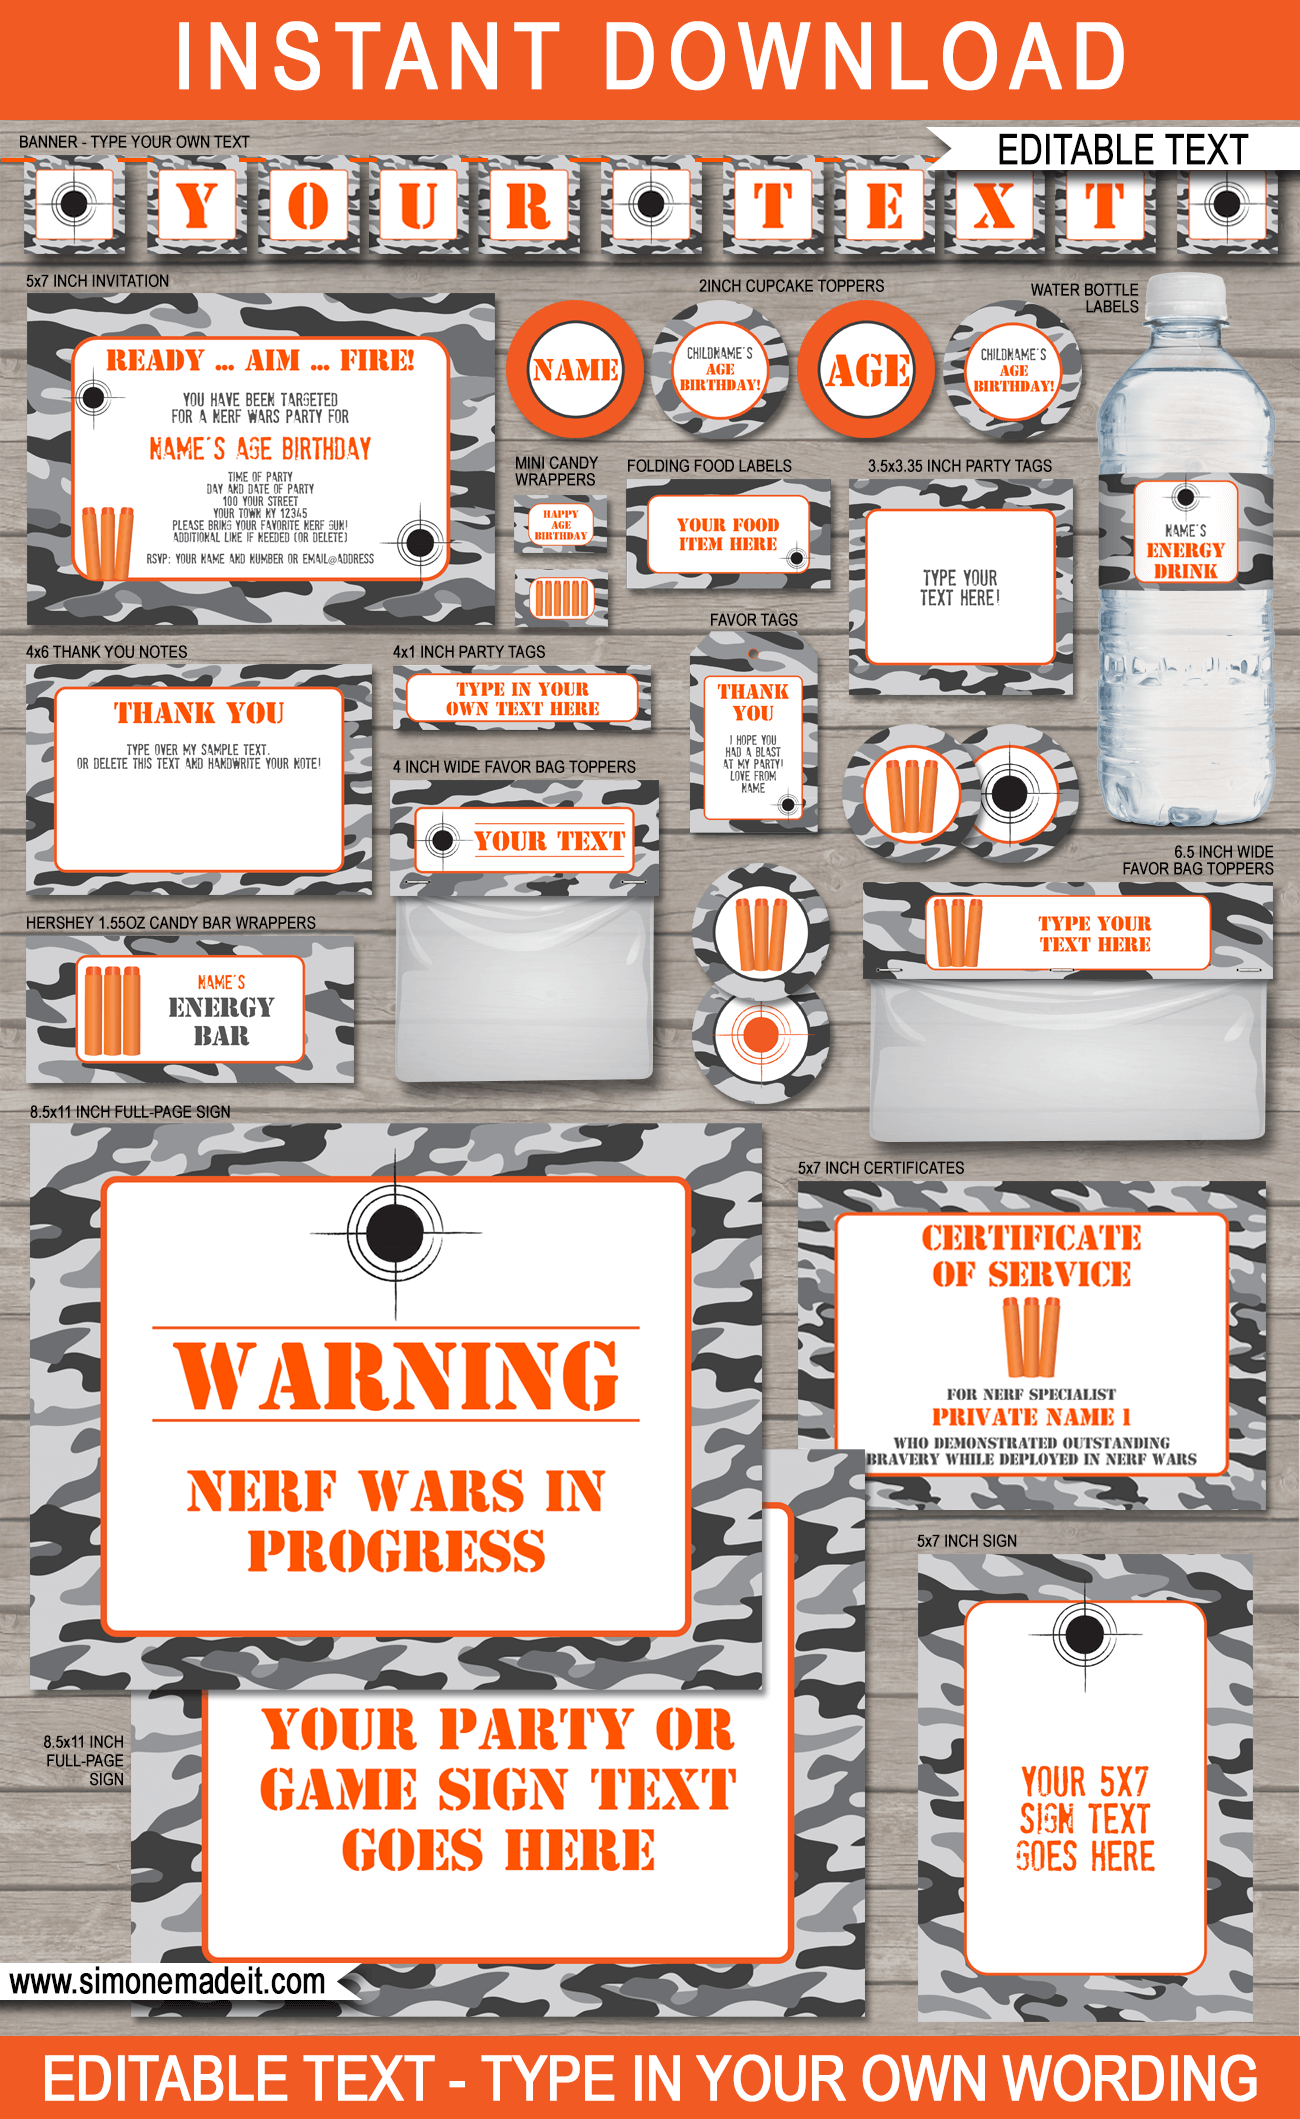 Gray Camo Nerf Party Printables | Nerf Wars | Birthday Party | Editable and Printable templates | INSTANT DOWNLOAD $12.50 via simonemadeit.com